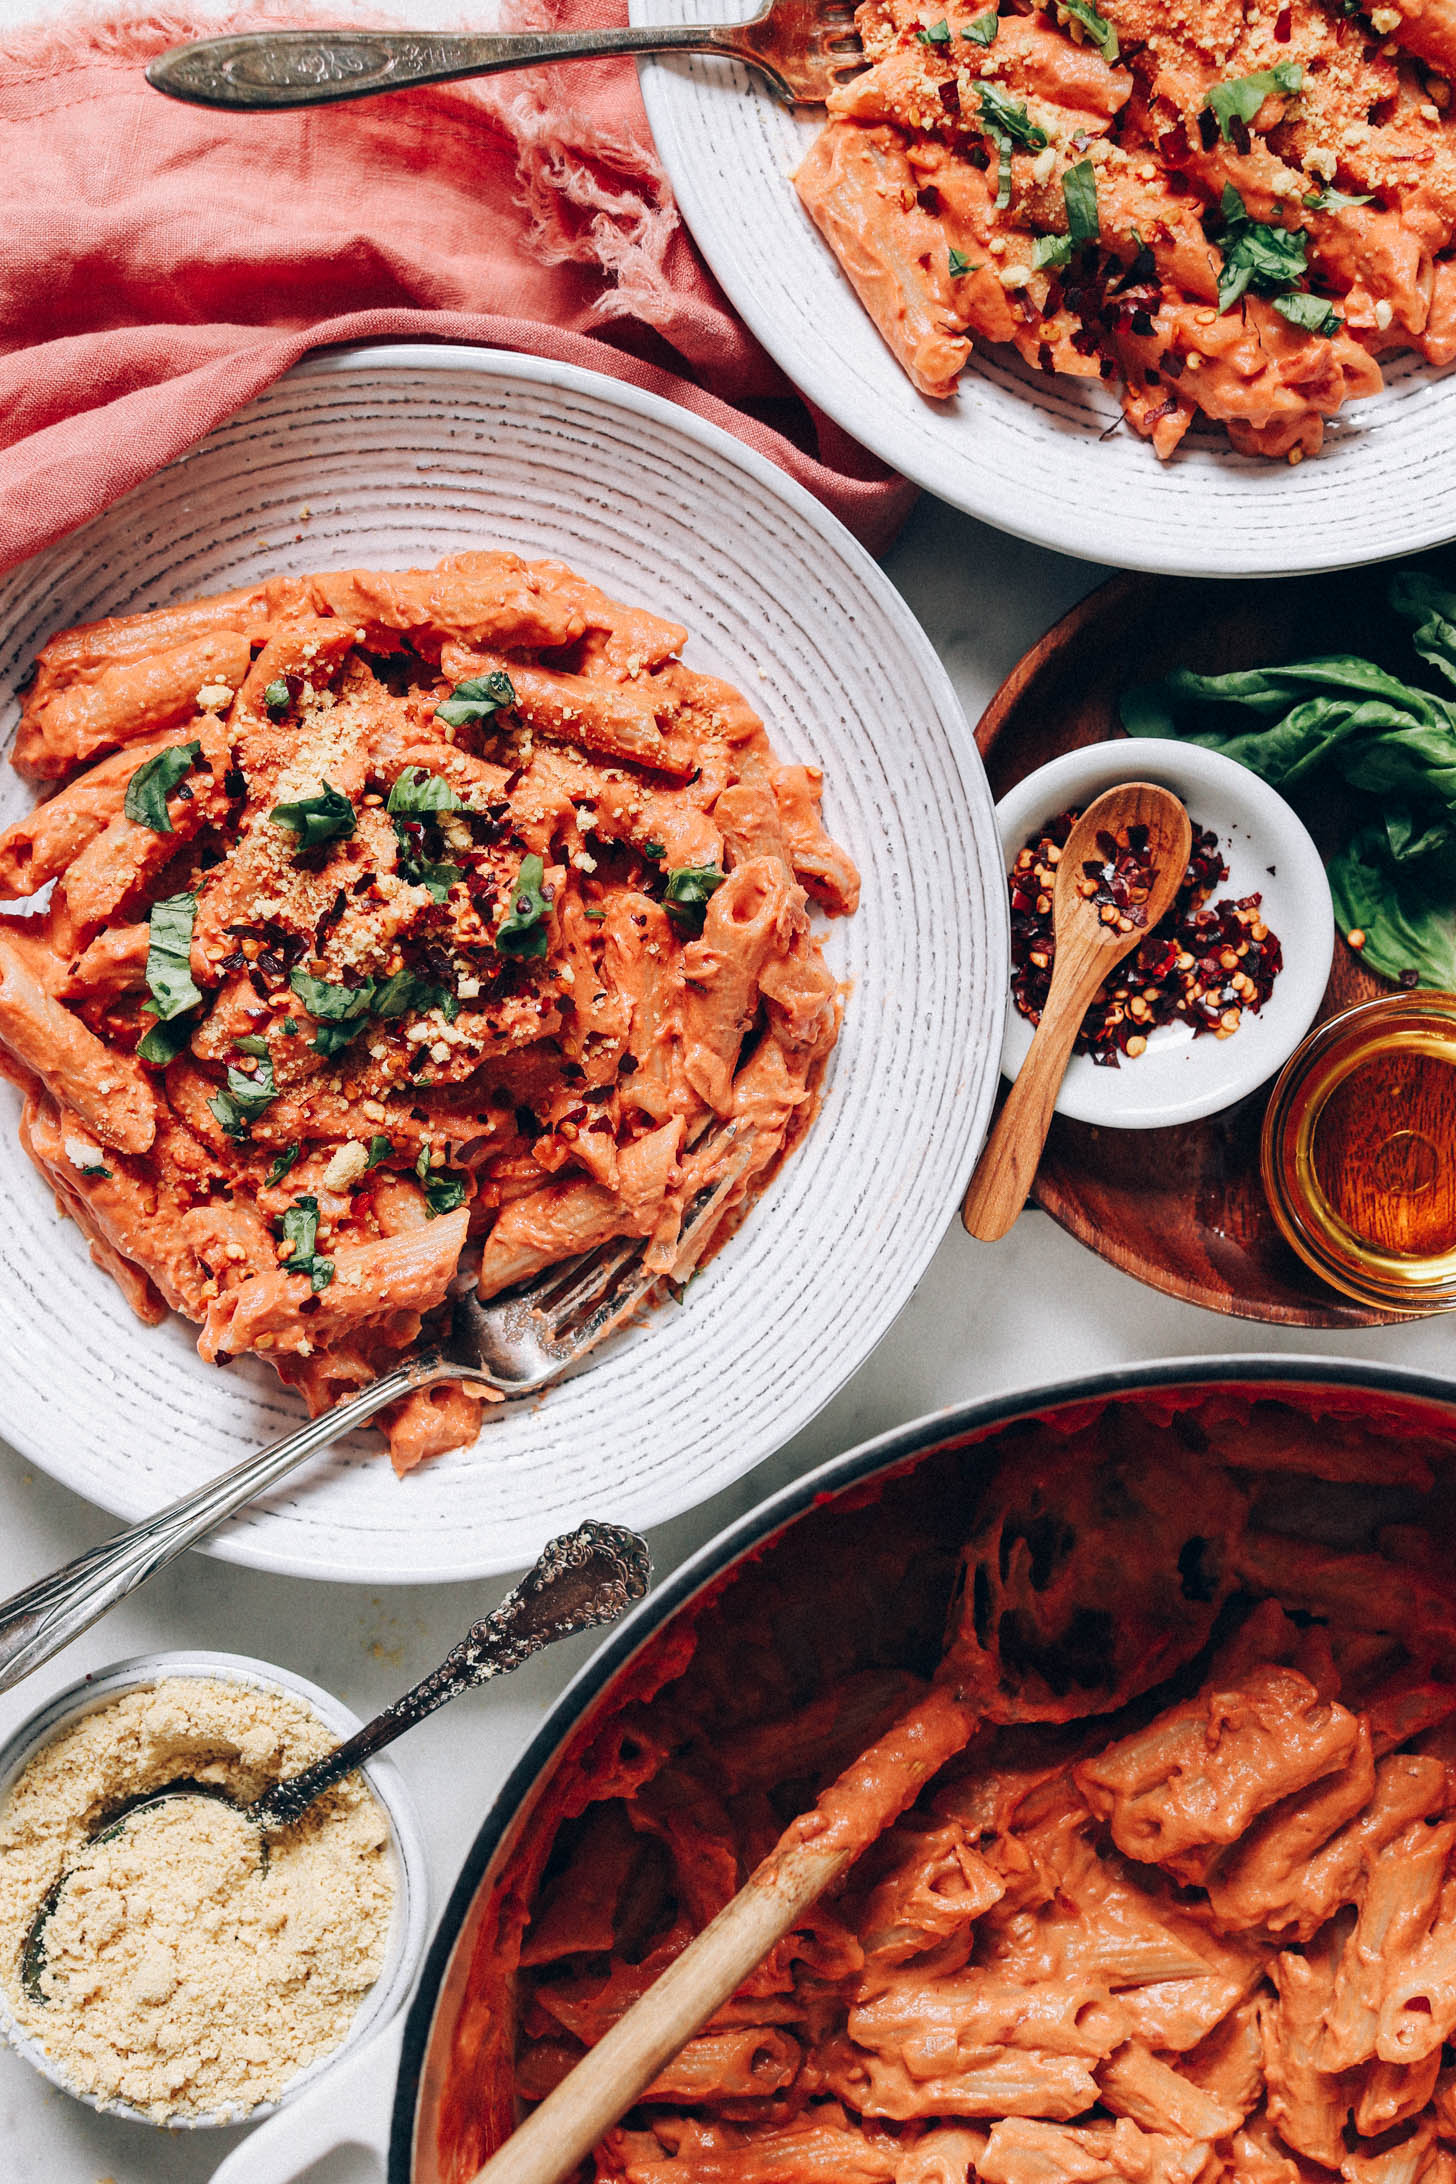 Two bowls of creamy vegan pink pasta next to a skillet with more pasta